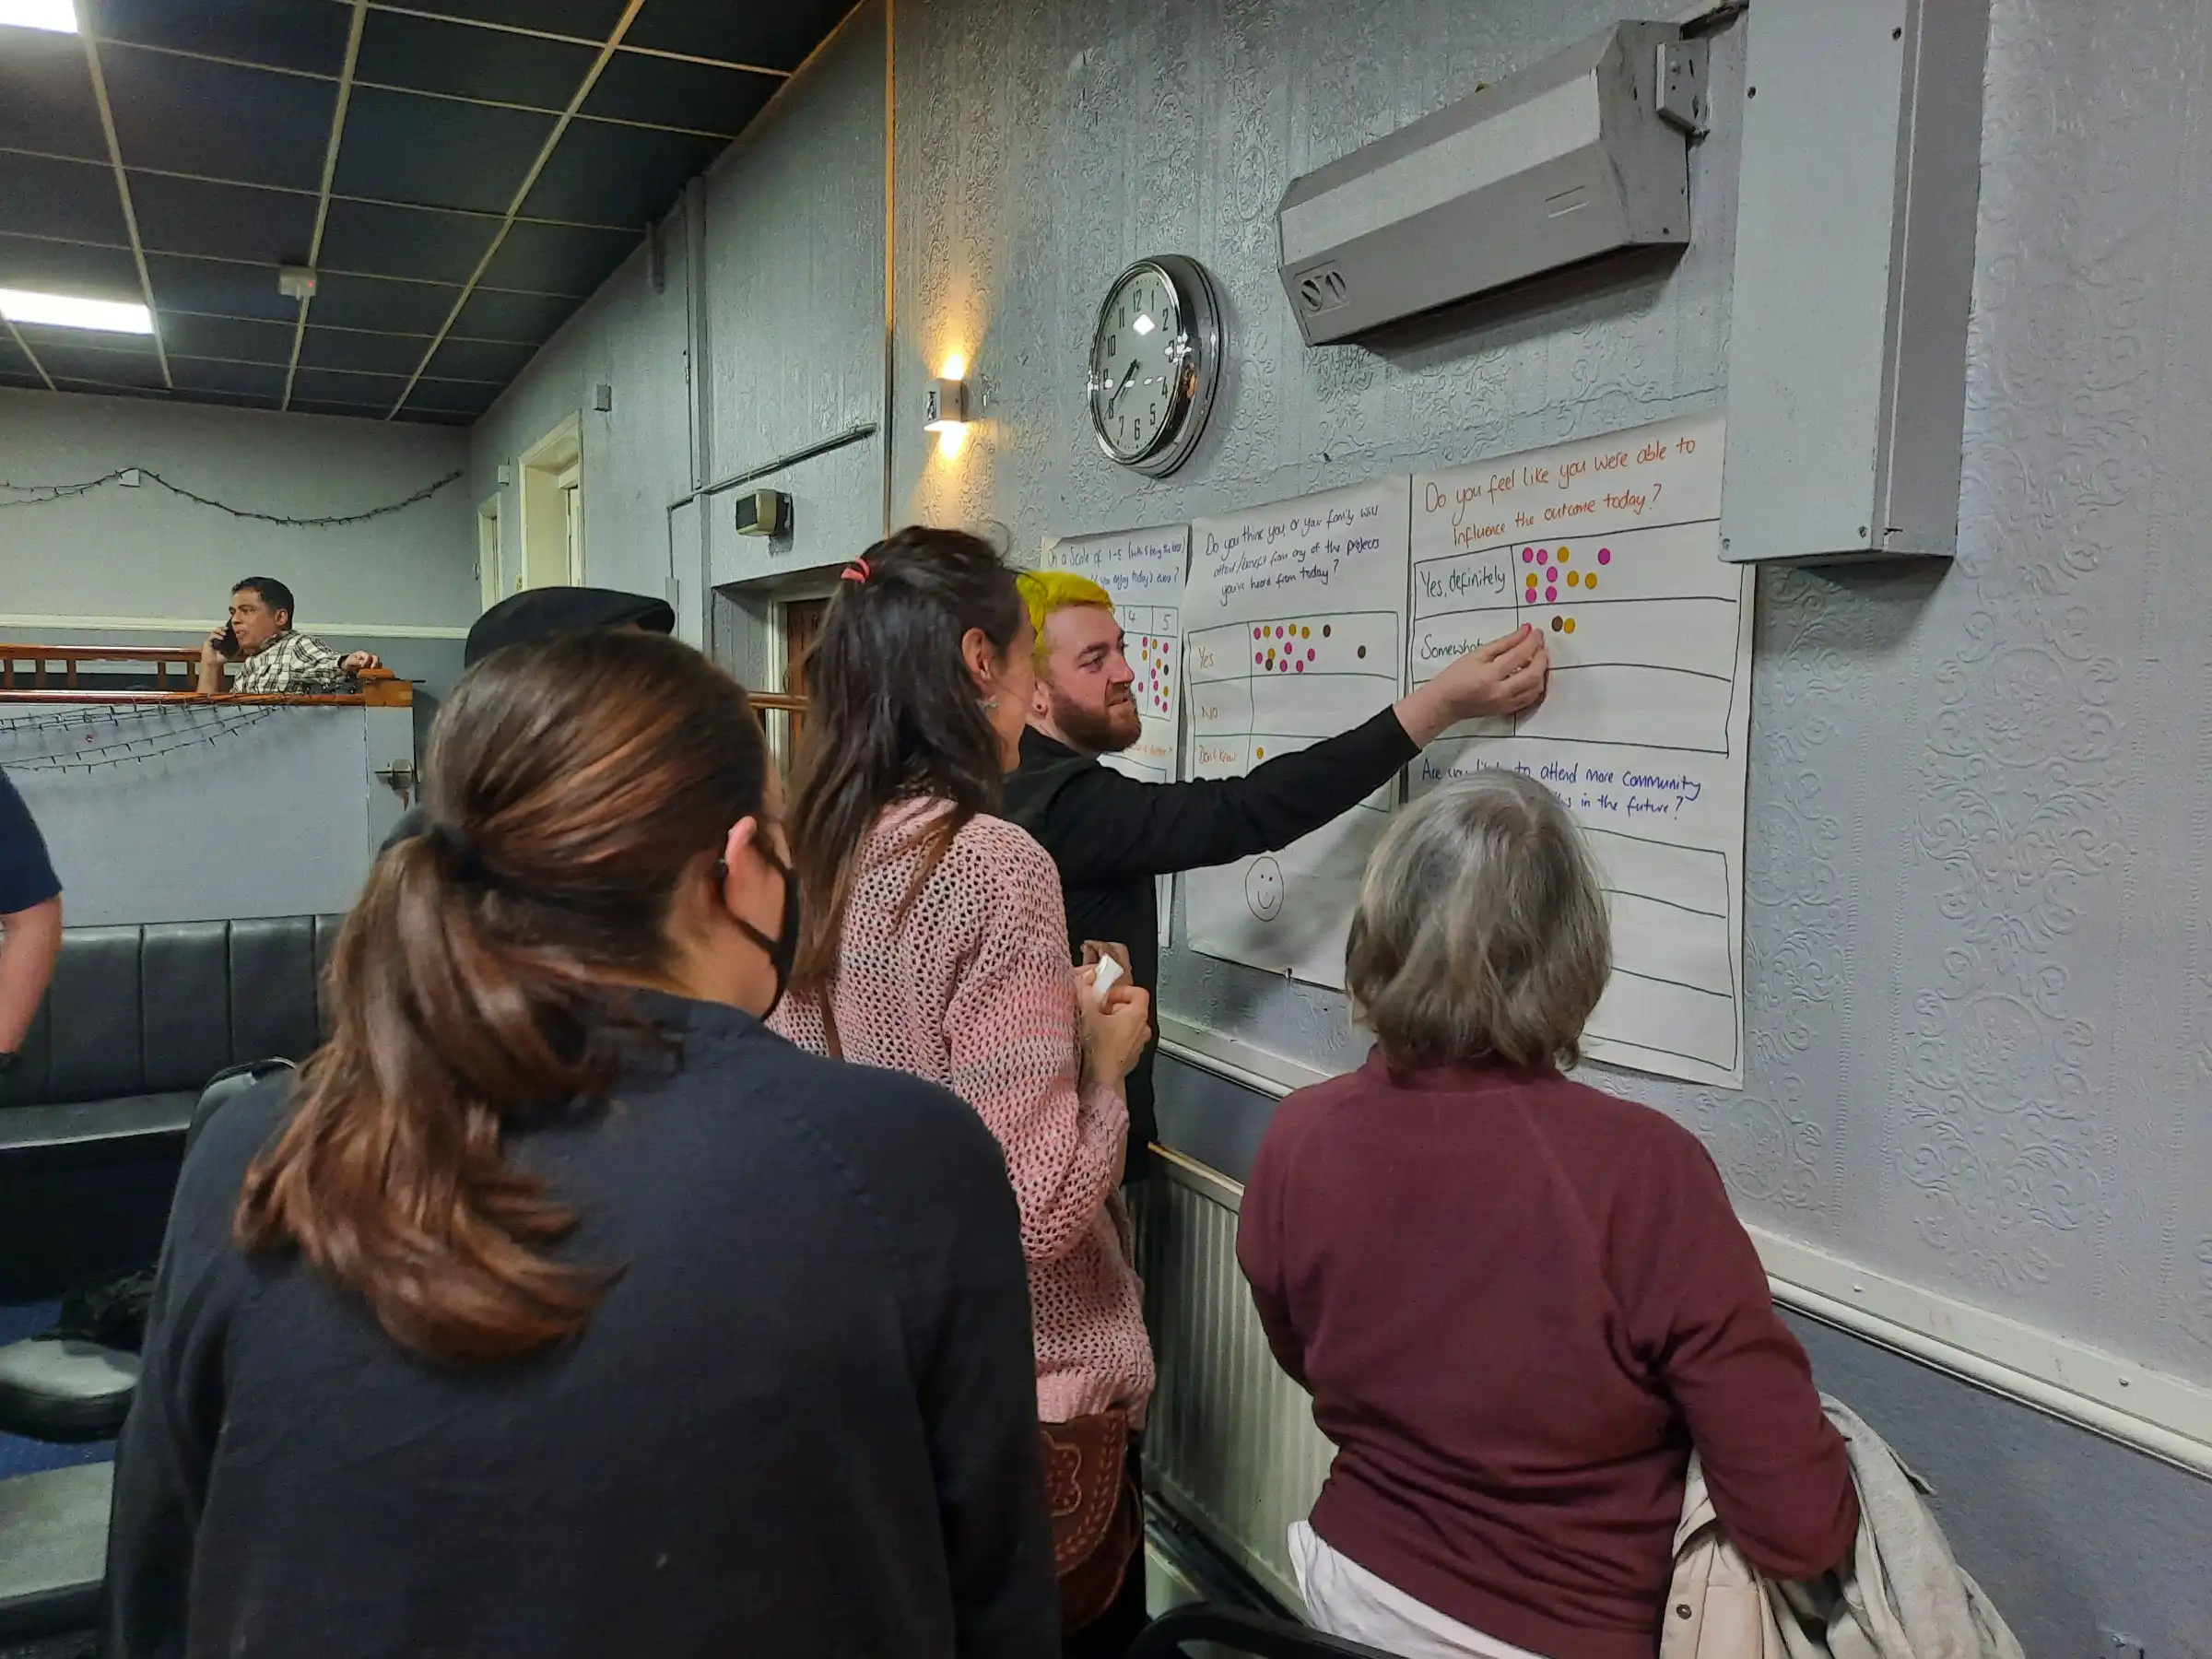 Group of residents evaluating the budgeting event by placing stickers on a sheets on the wall